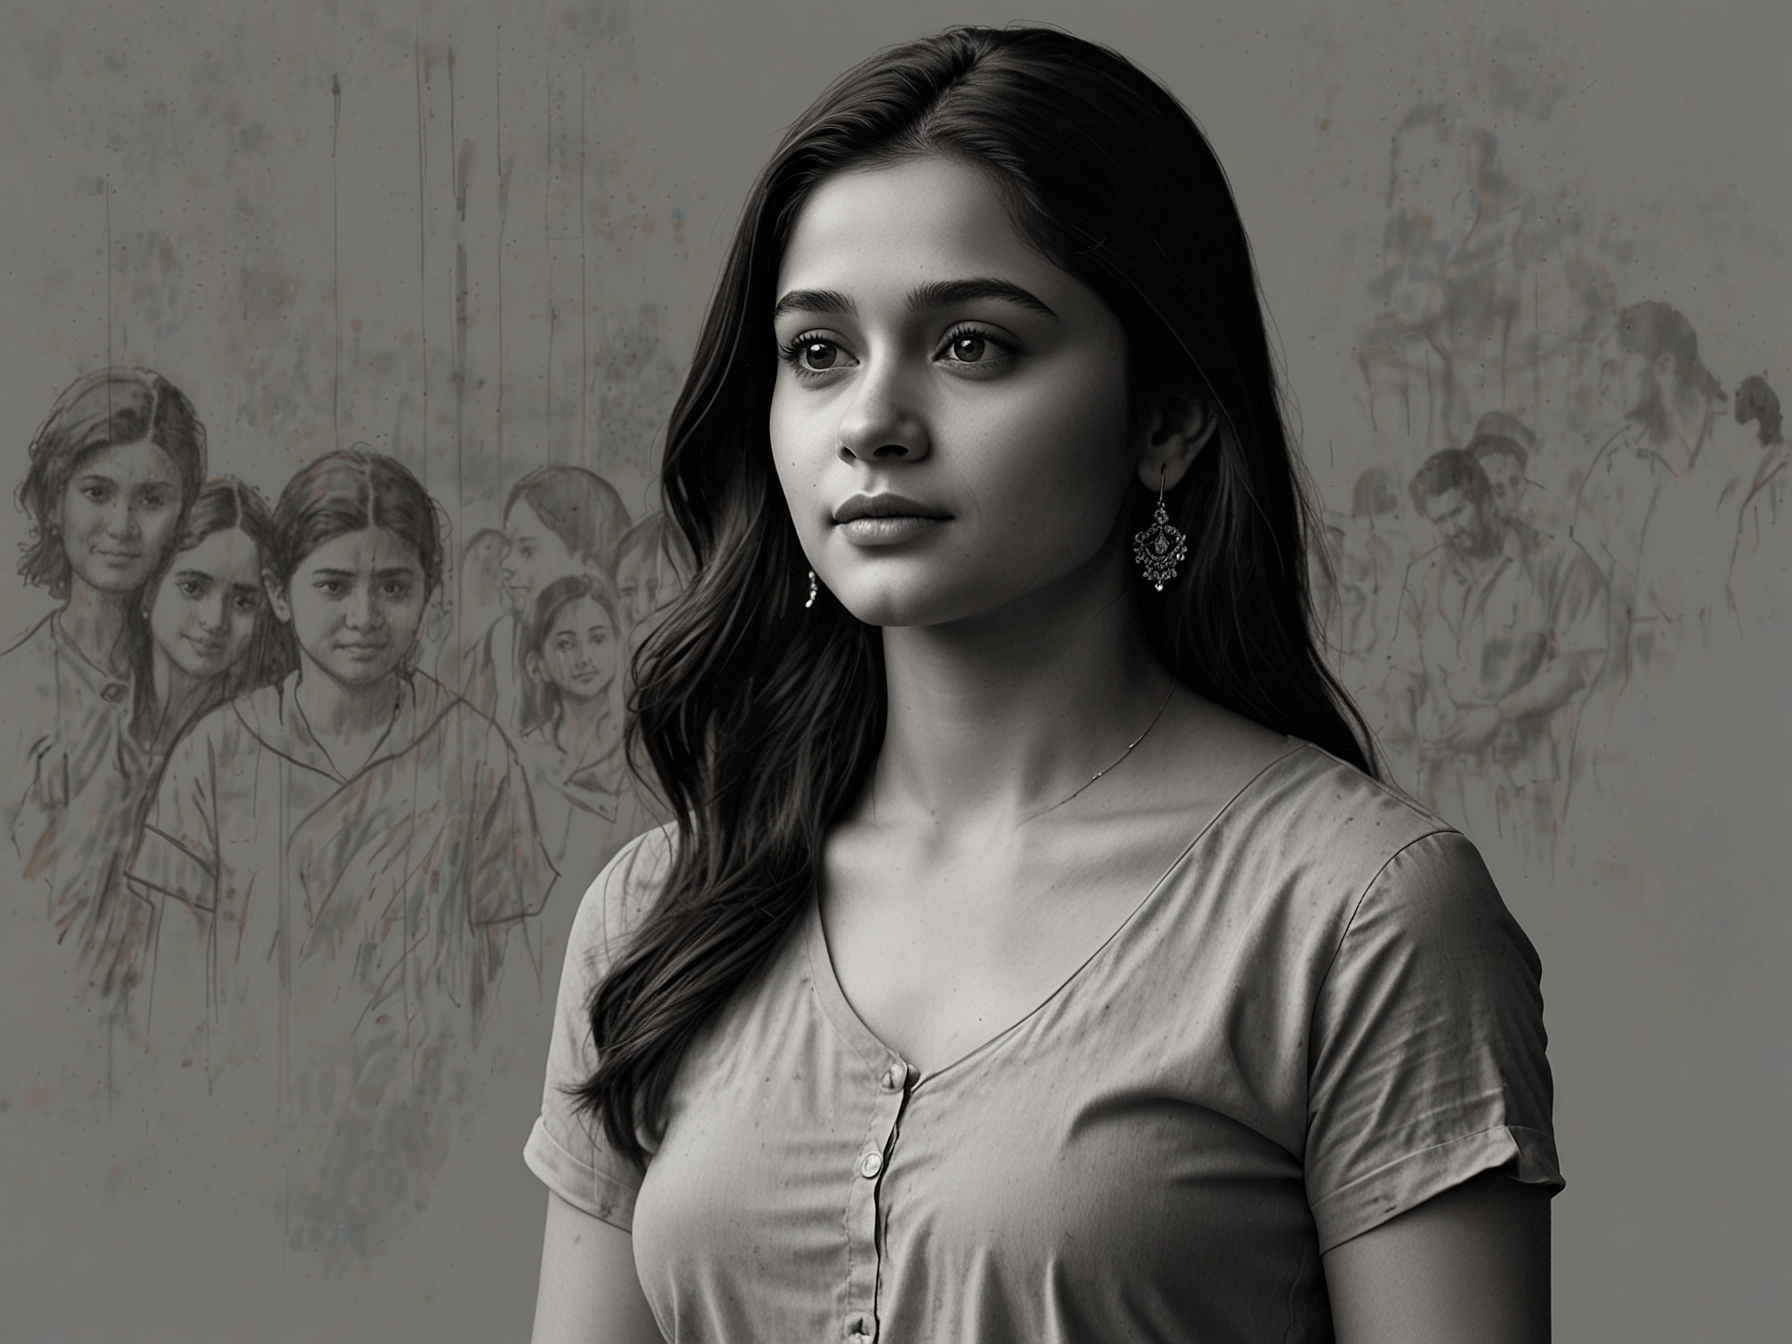 Alia Bhatt in a heartfelt scene from 'Jigra,' portraying a character resonating with themes of family, protection, and resilience, reflecting her own experiences of motherhood.